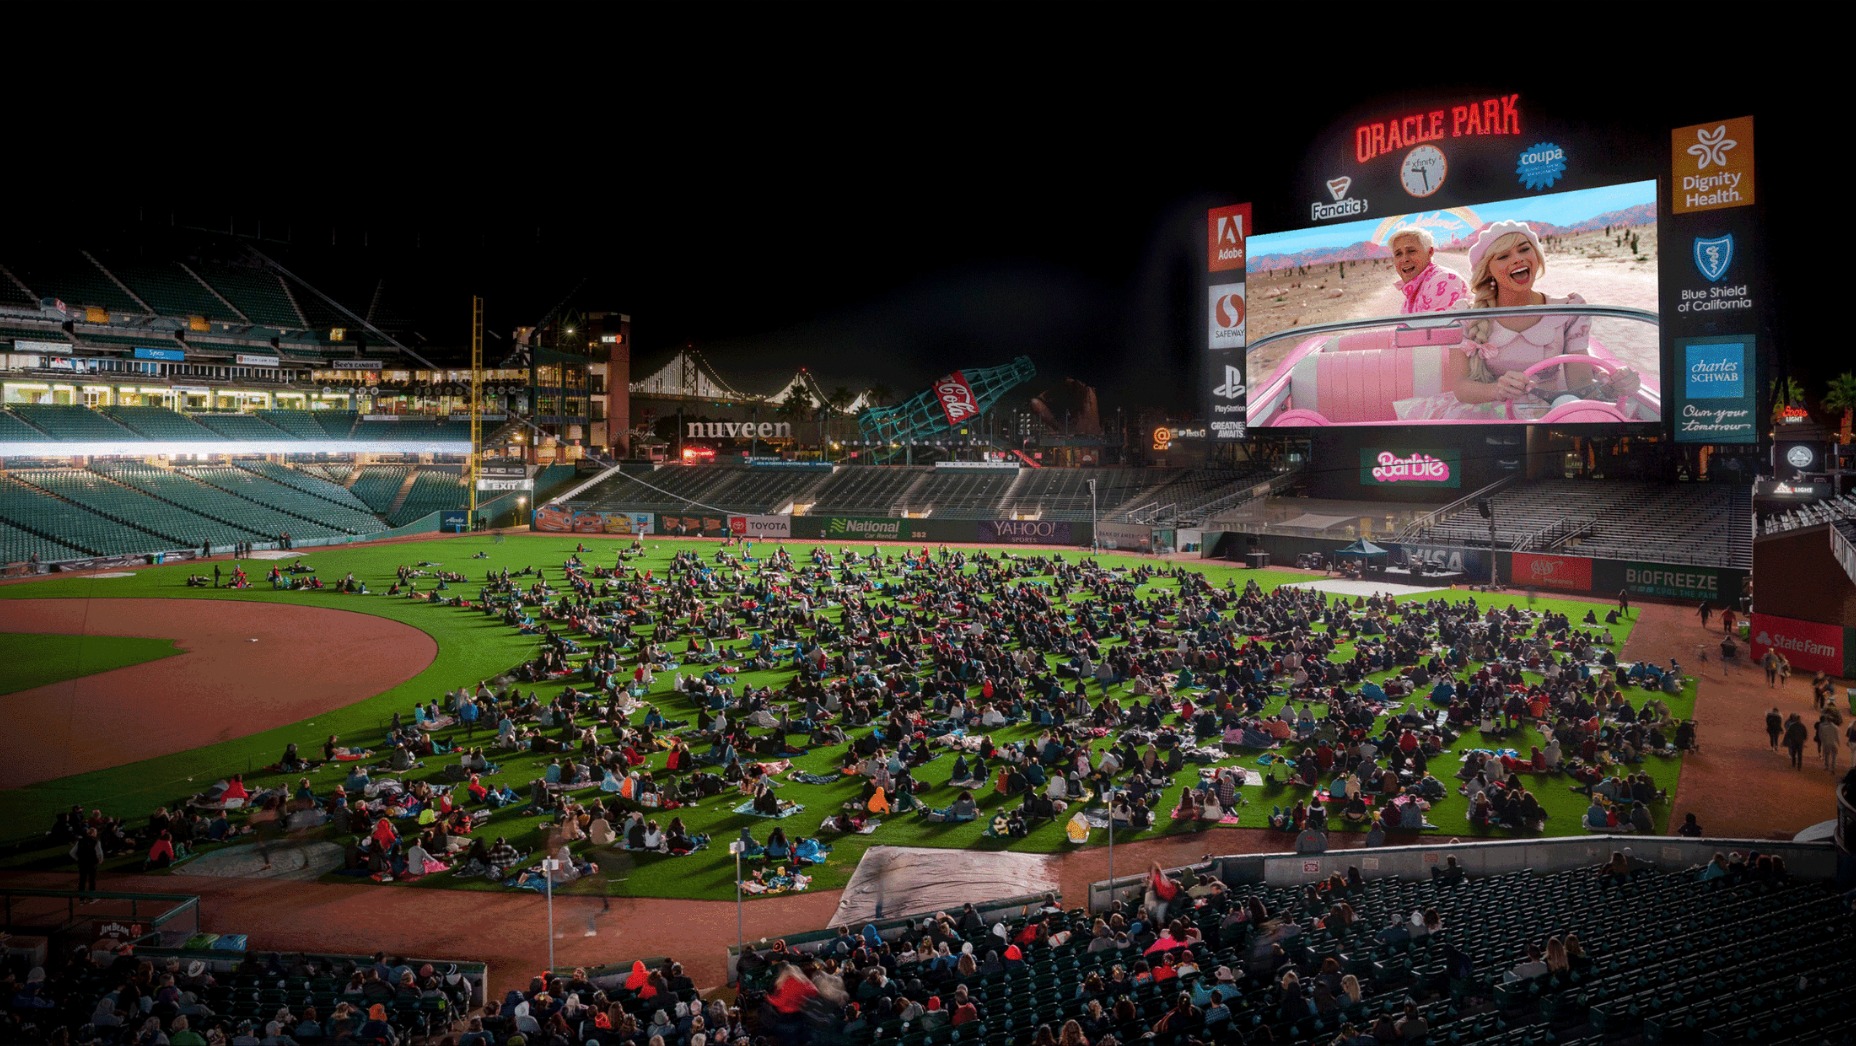 A screening of this year's hit movie &quot;Barbie&quot; is set for Oracle Park this upcoming Halloween weekend, with tickets going on sale Monday.